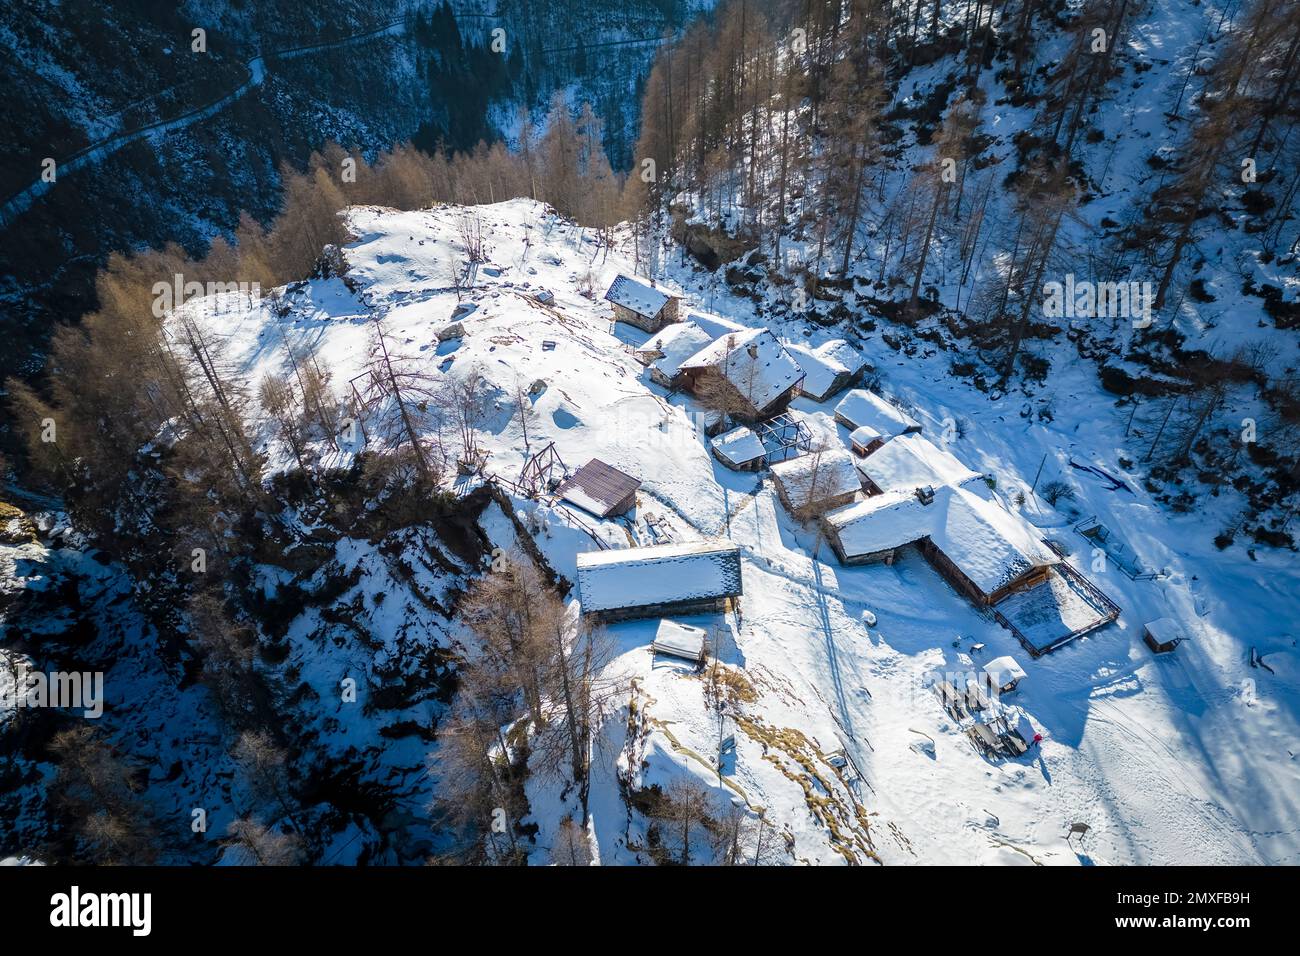 Aerial view of the Pastore Refuge at dawn in winter. Alpe Pile, Alagna, Valsesia, Alagna, Valsesia, Vercelli province, Piedmont, Italy, Europe. Stock Photo